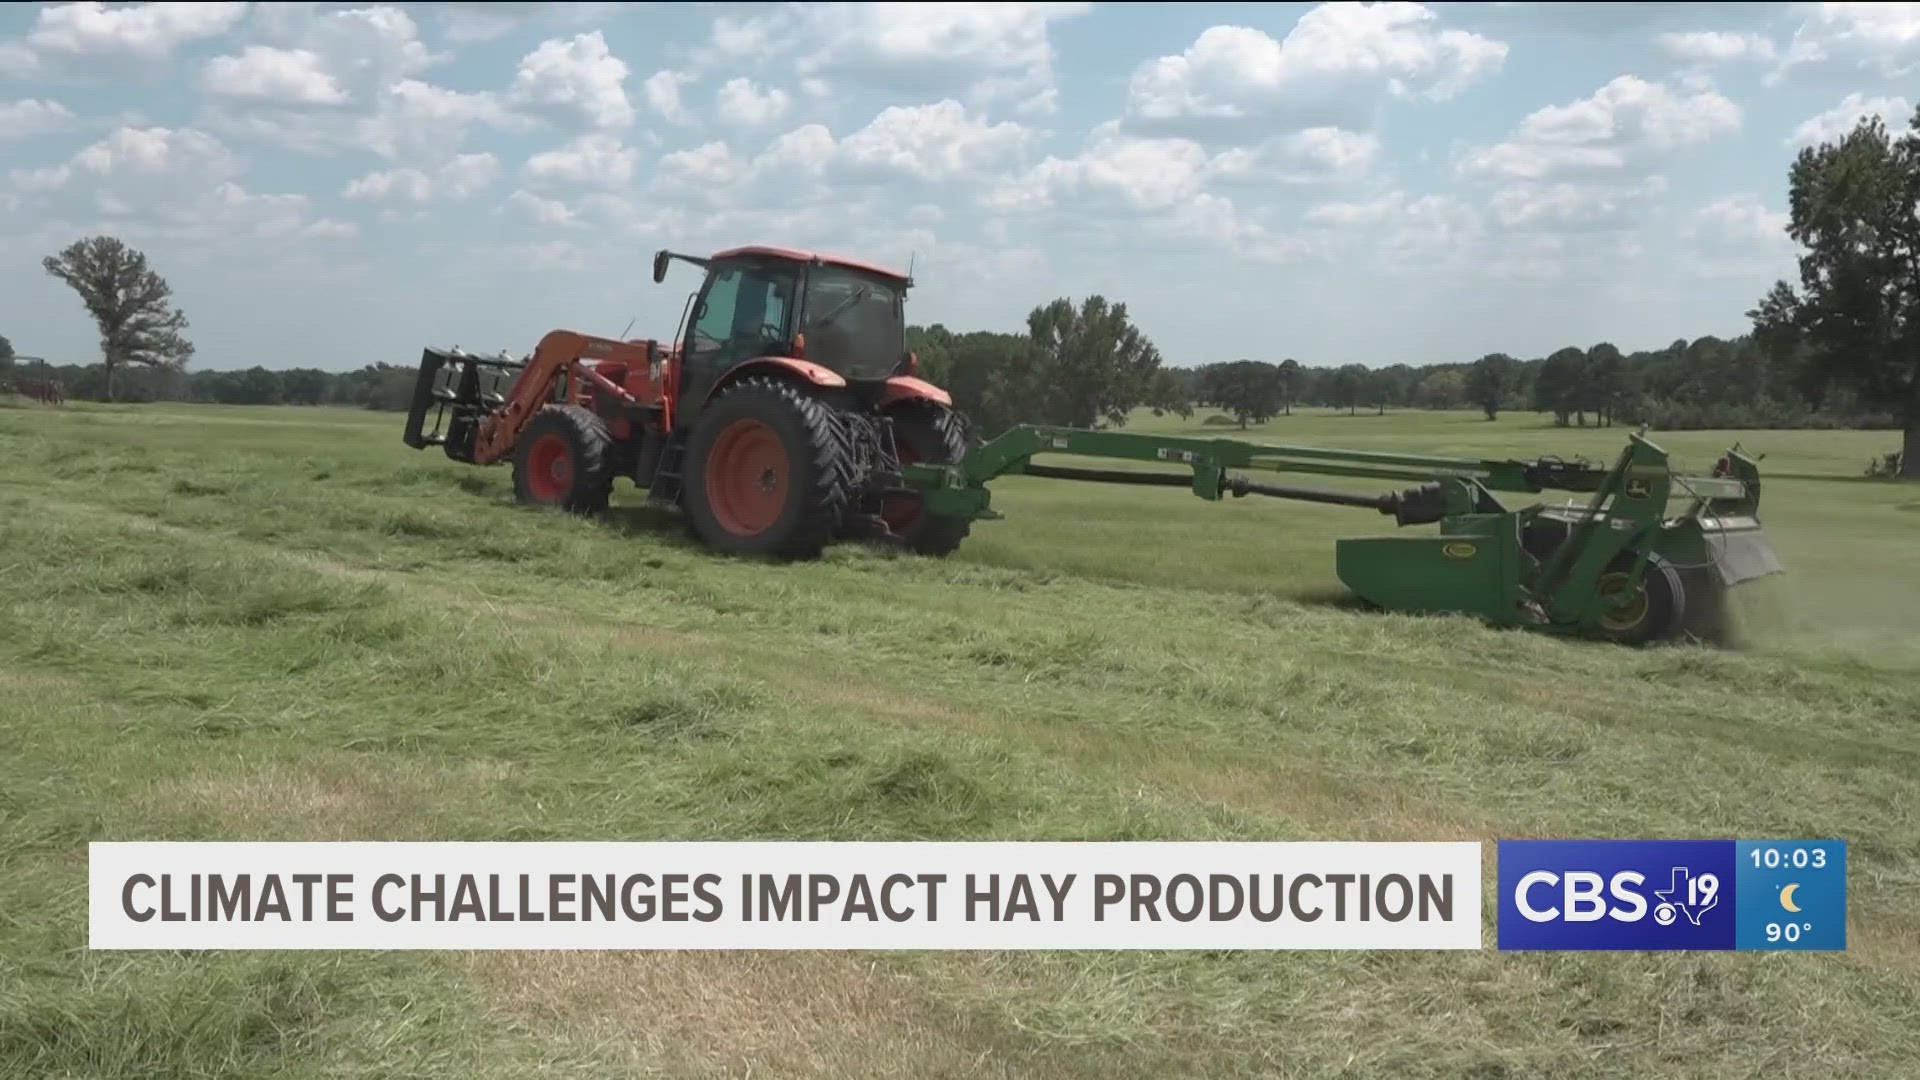 "We're trying to preserve or take everything that we can because the grass has stopped growing," said David Powell, owner of East Texas Hay Co.